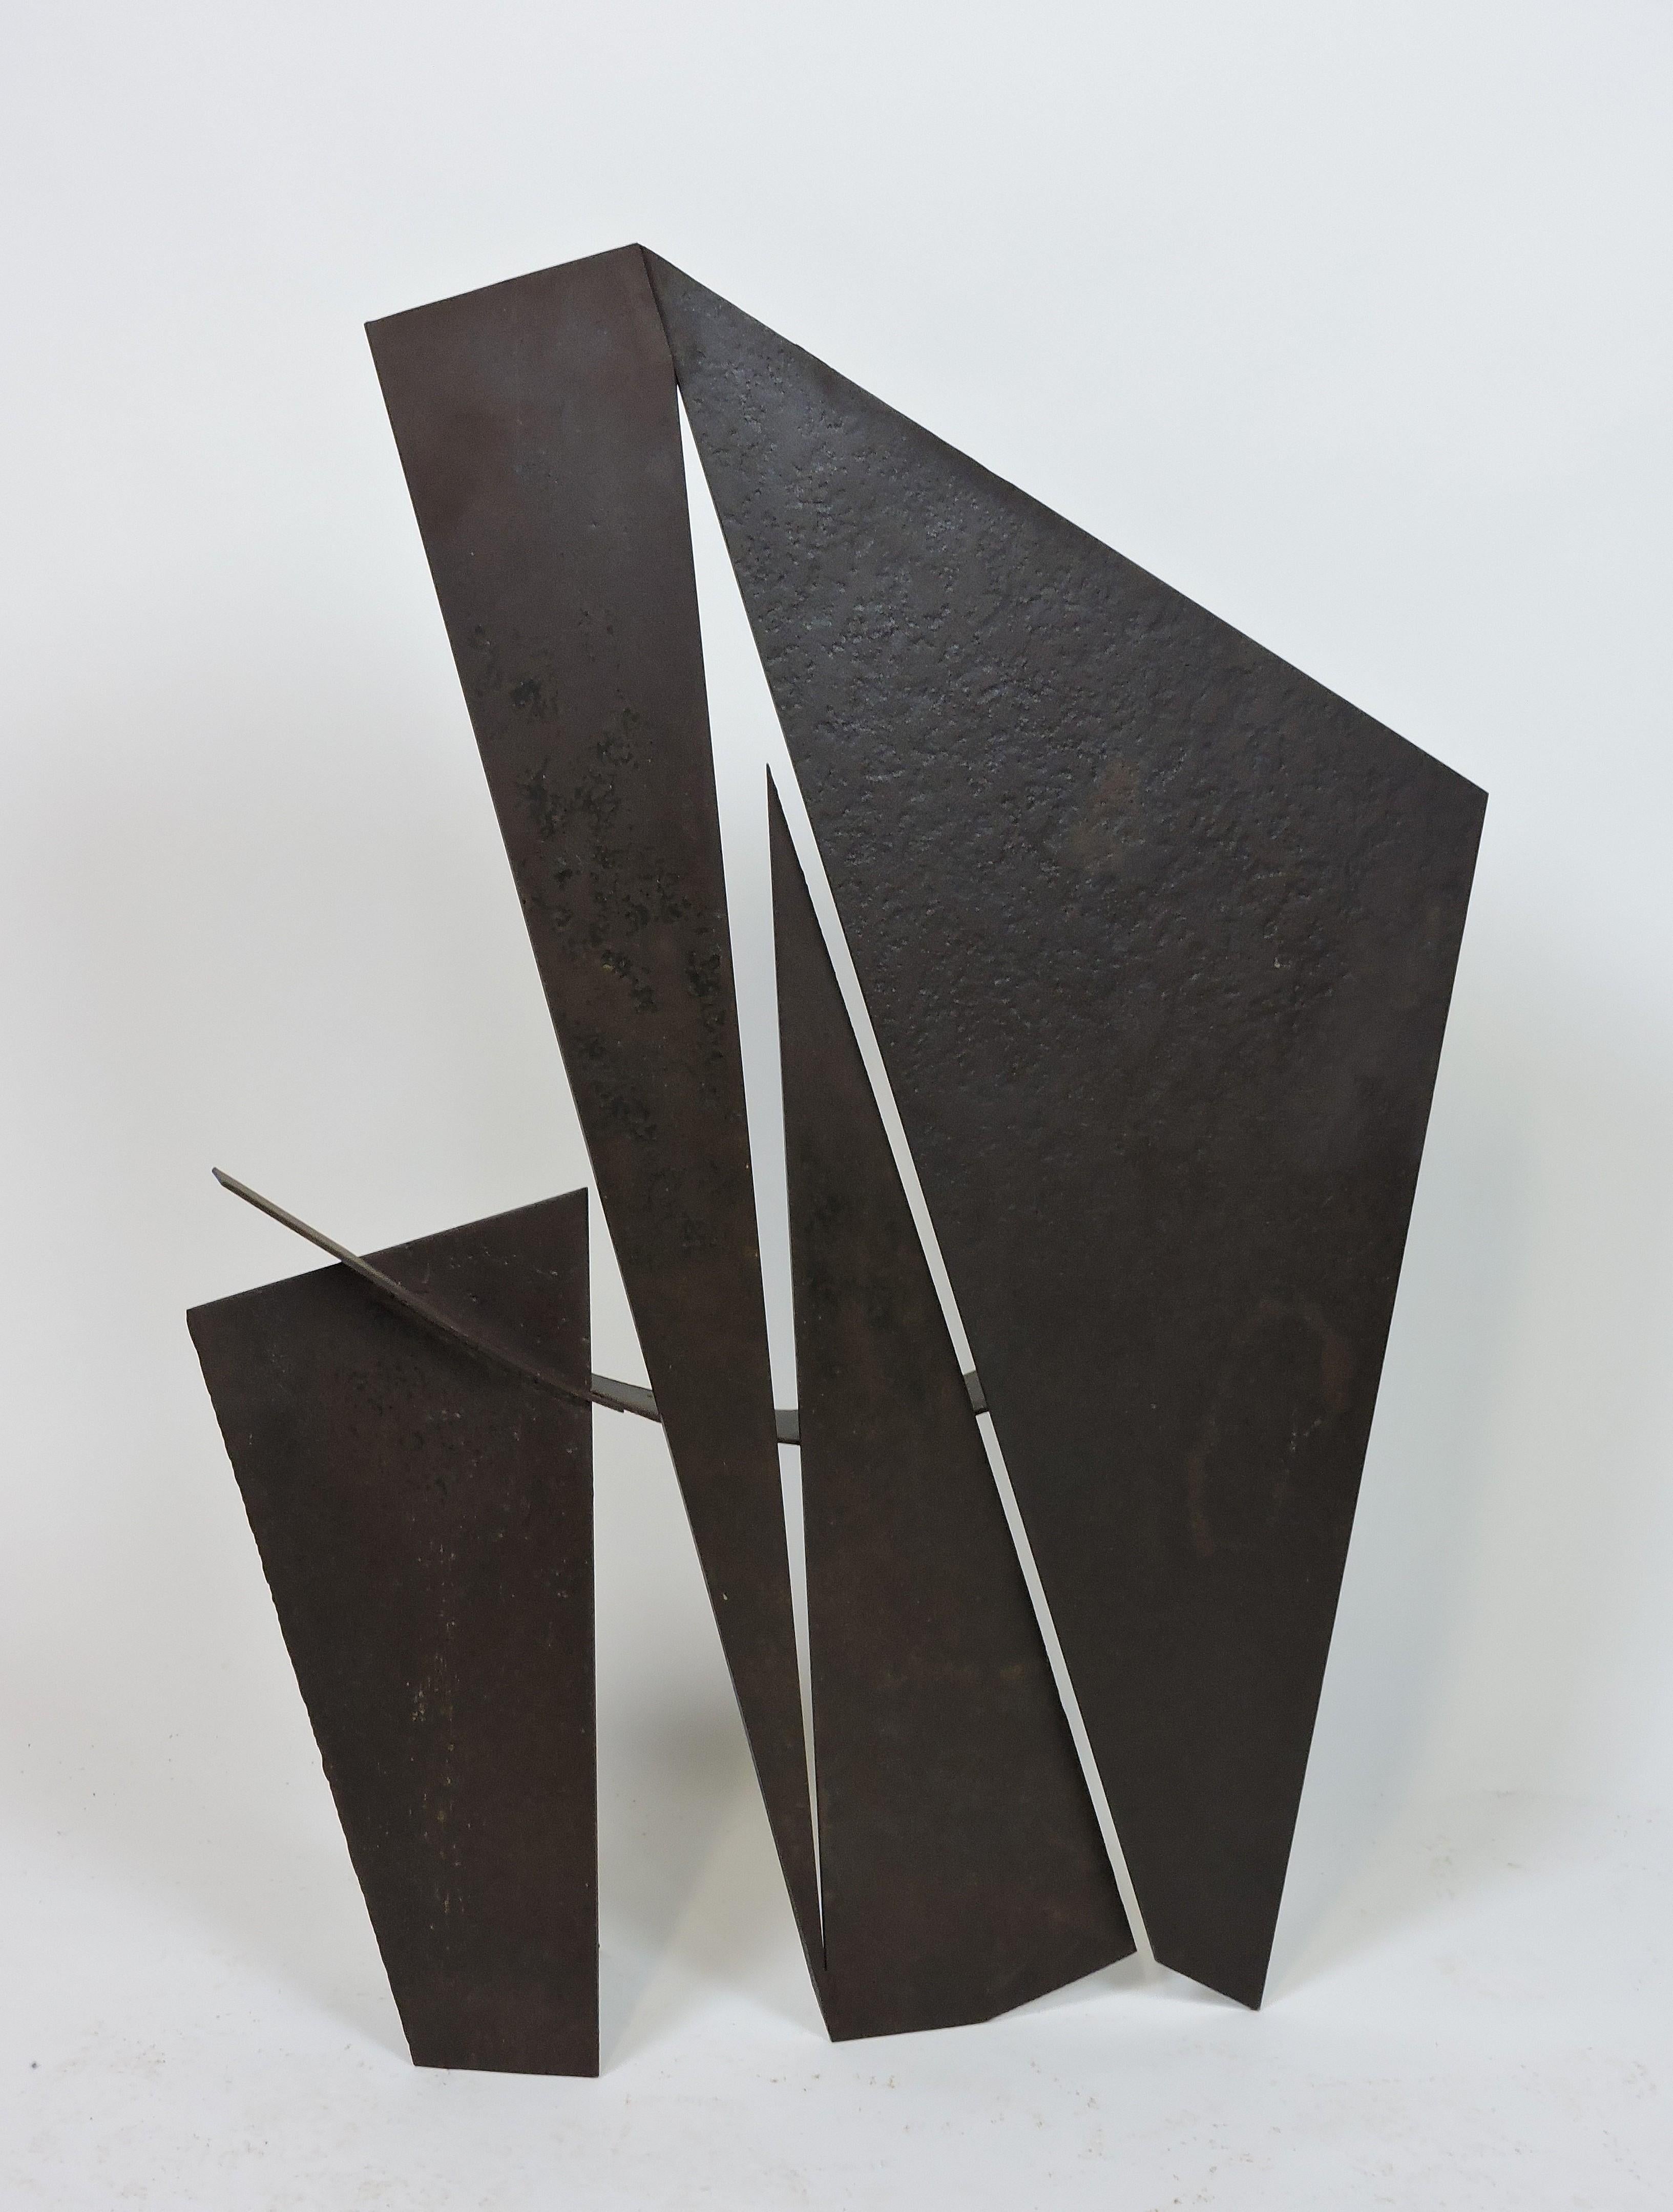 Minimalist Abstract Welded Geometric Steel Sculpture by David Tothero